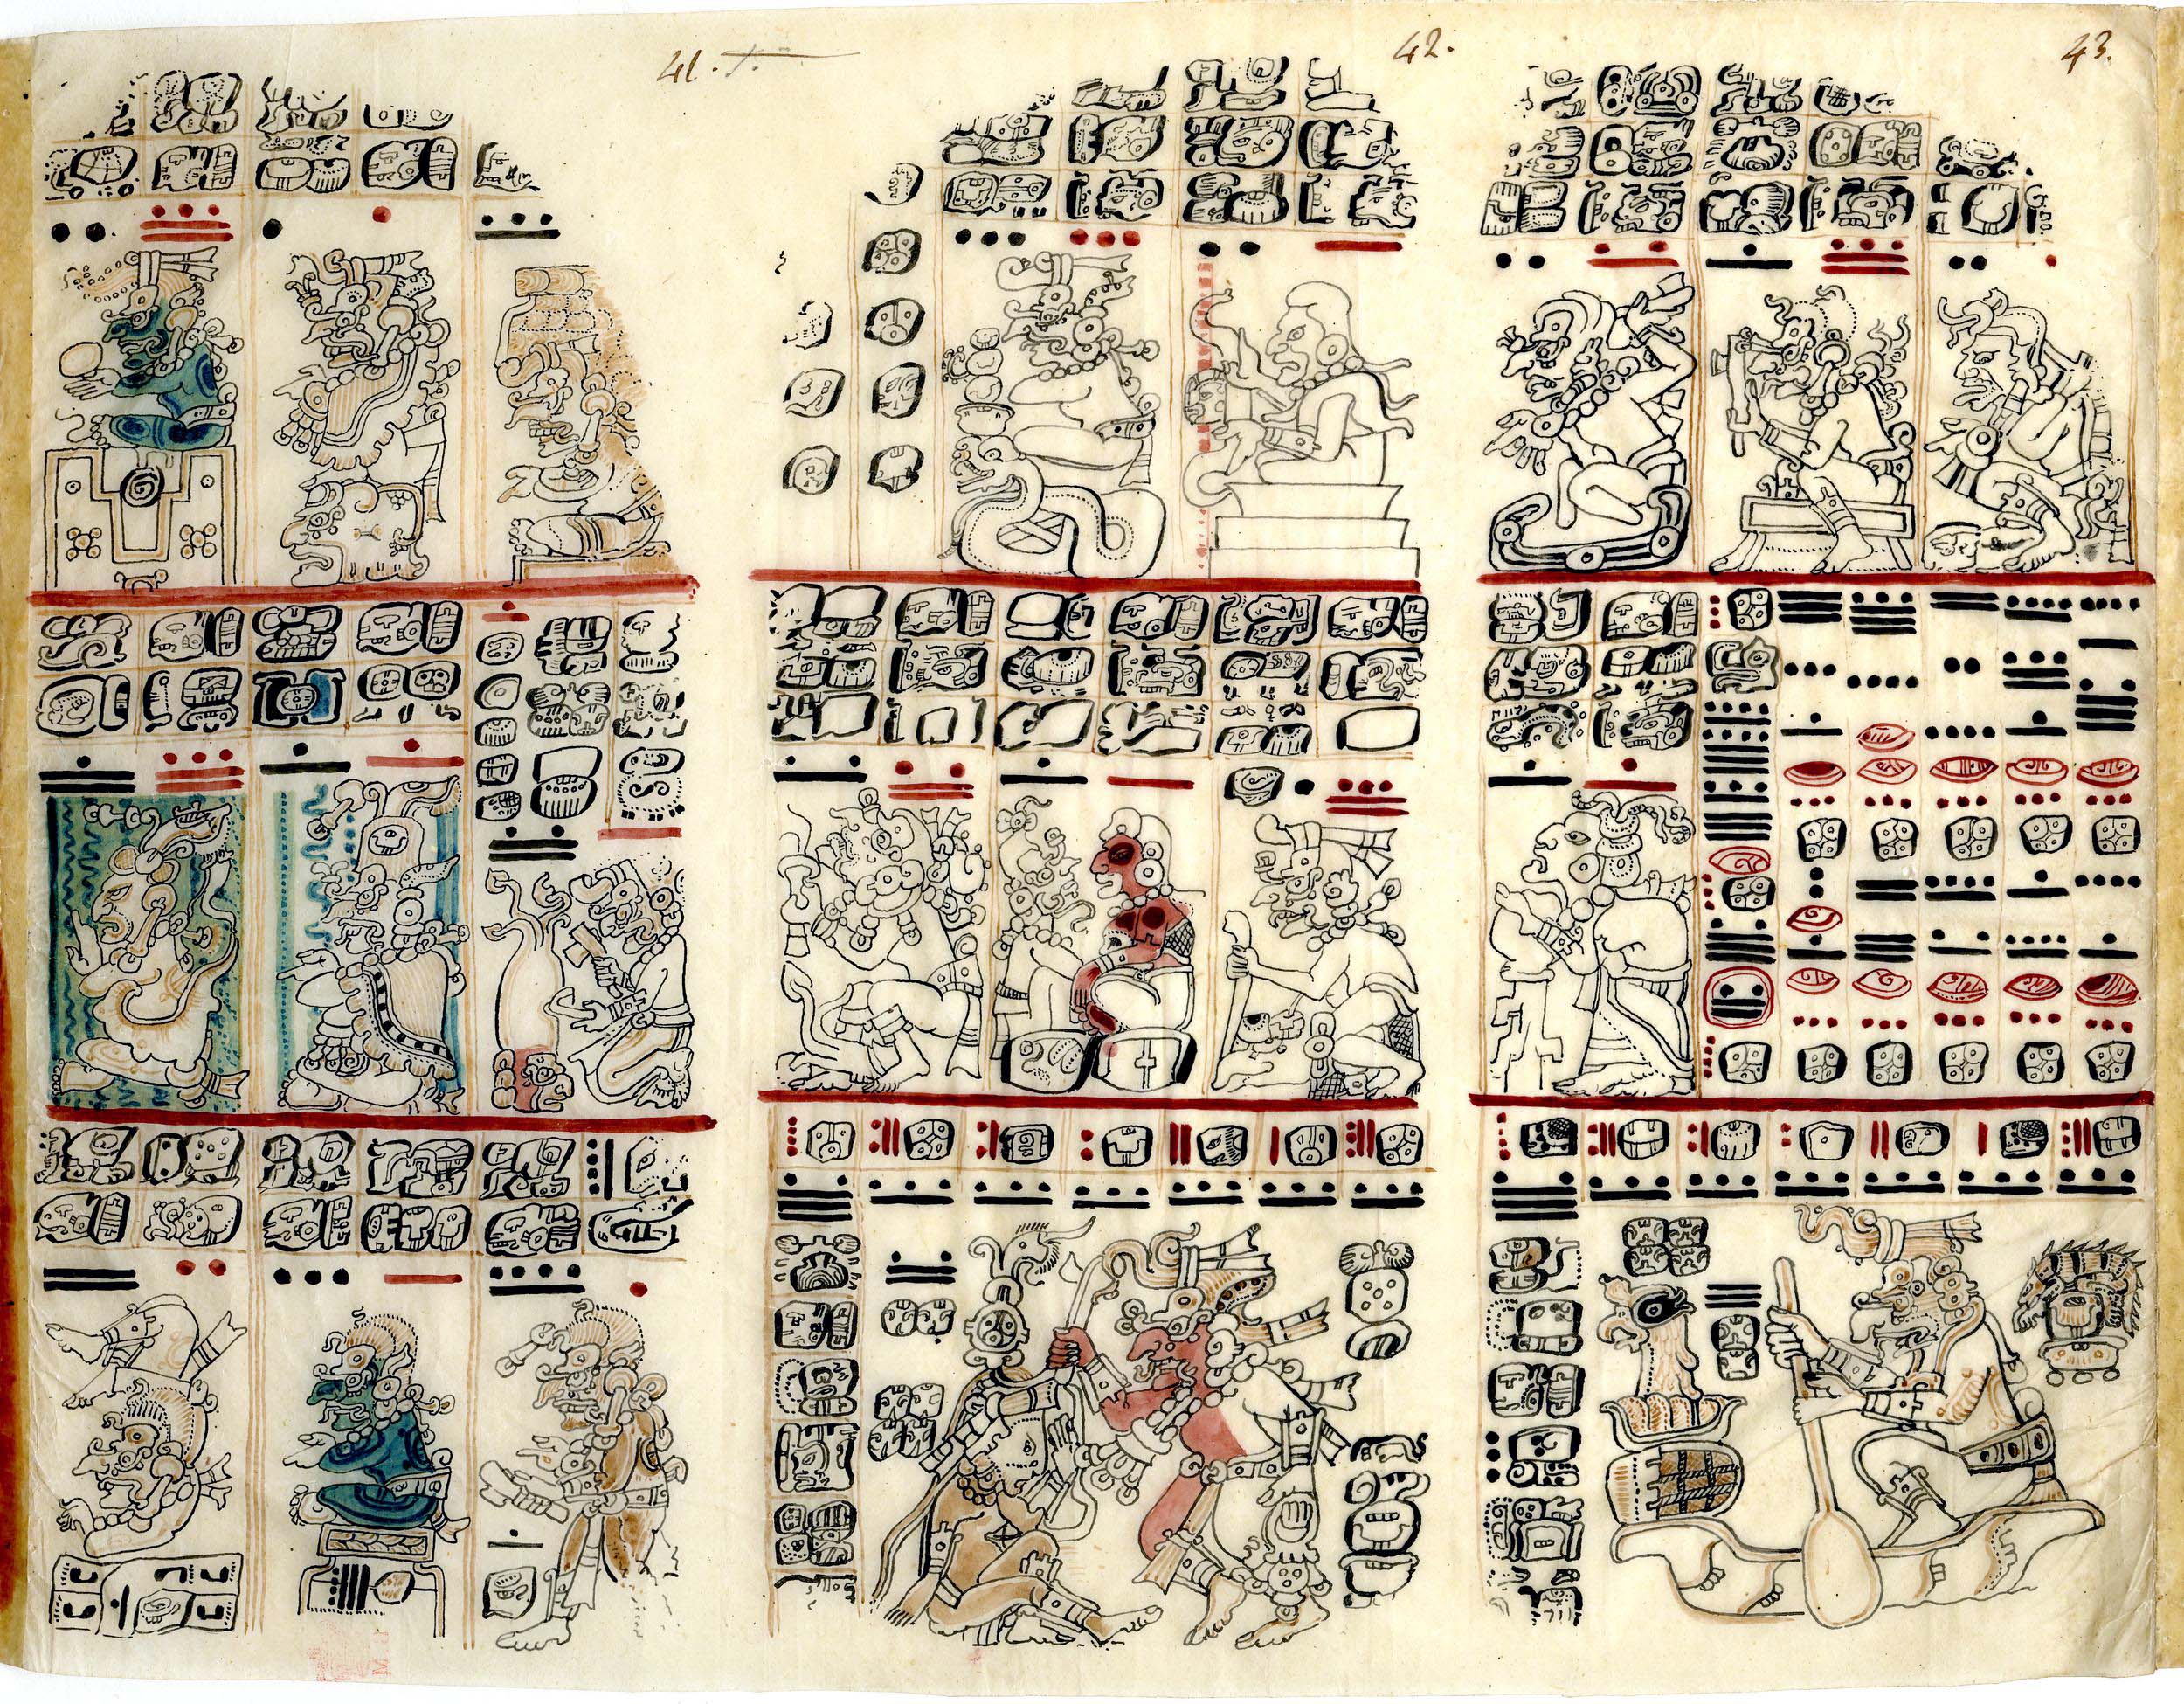 Codex Dresden, also known as Codex Dresdensis, facsimile from 1825–31, original from c. 1500 (© Trustees of the British Museum)